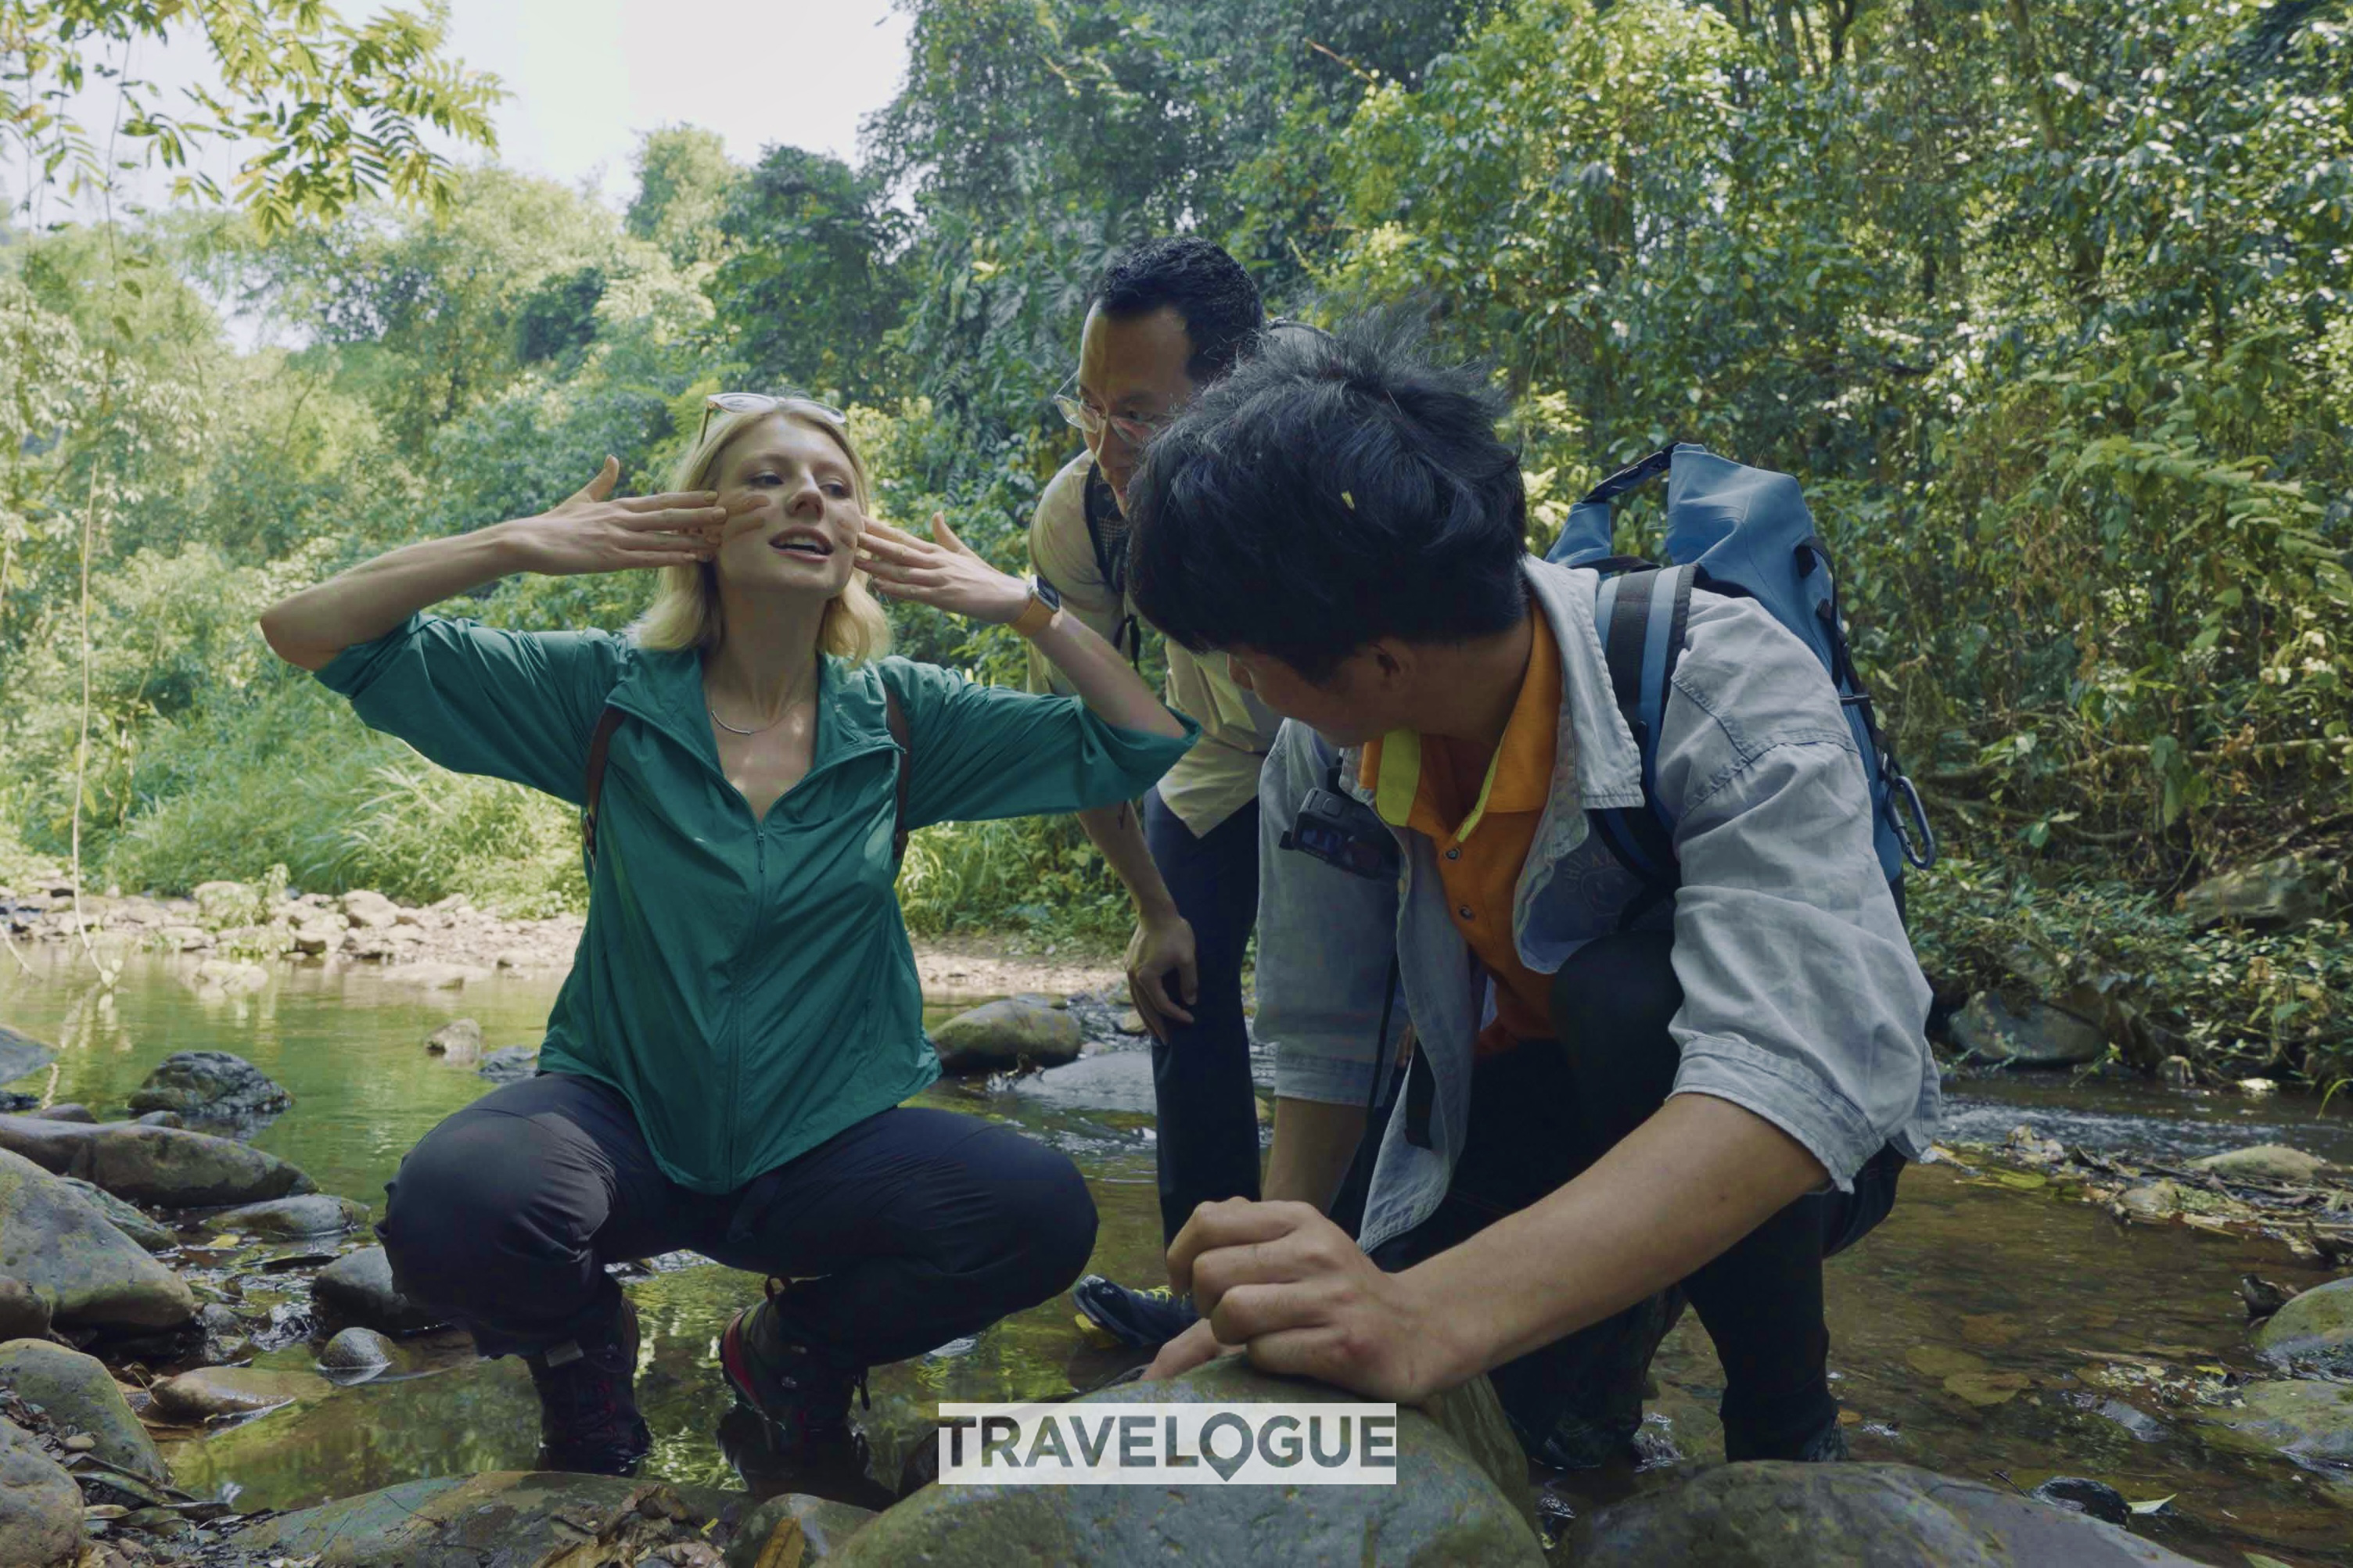 CGTN reporters try to use rocks to protect their skin in the rainforests of Xishuangbanna, Yunnan Province. /CGTN